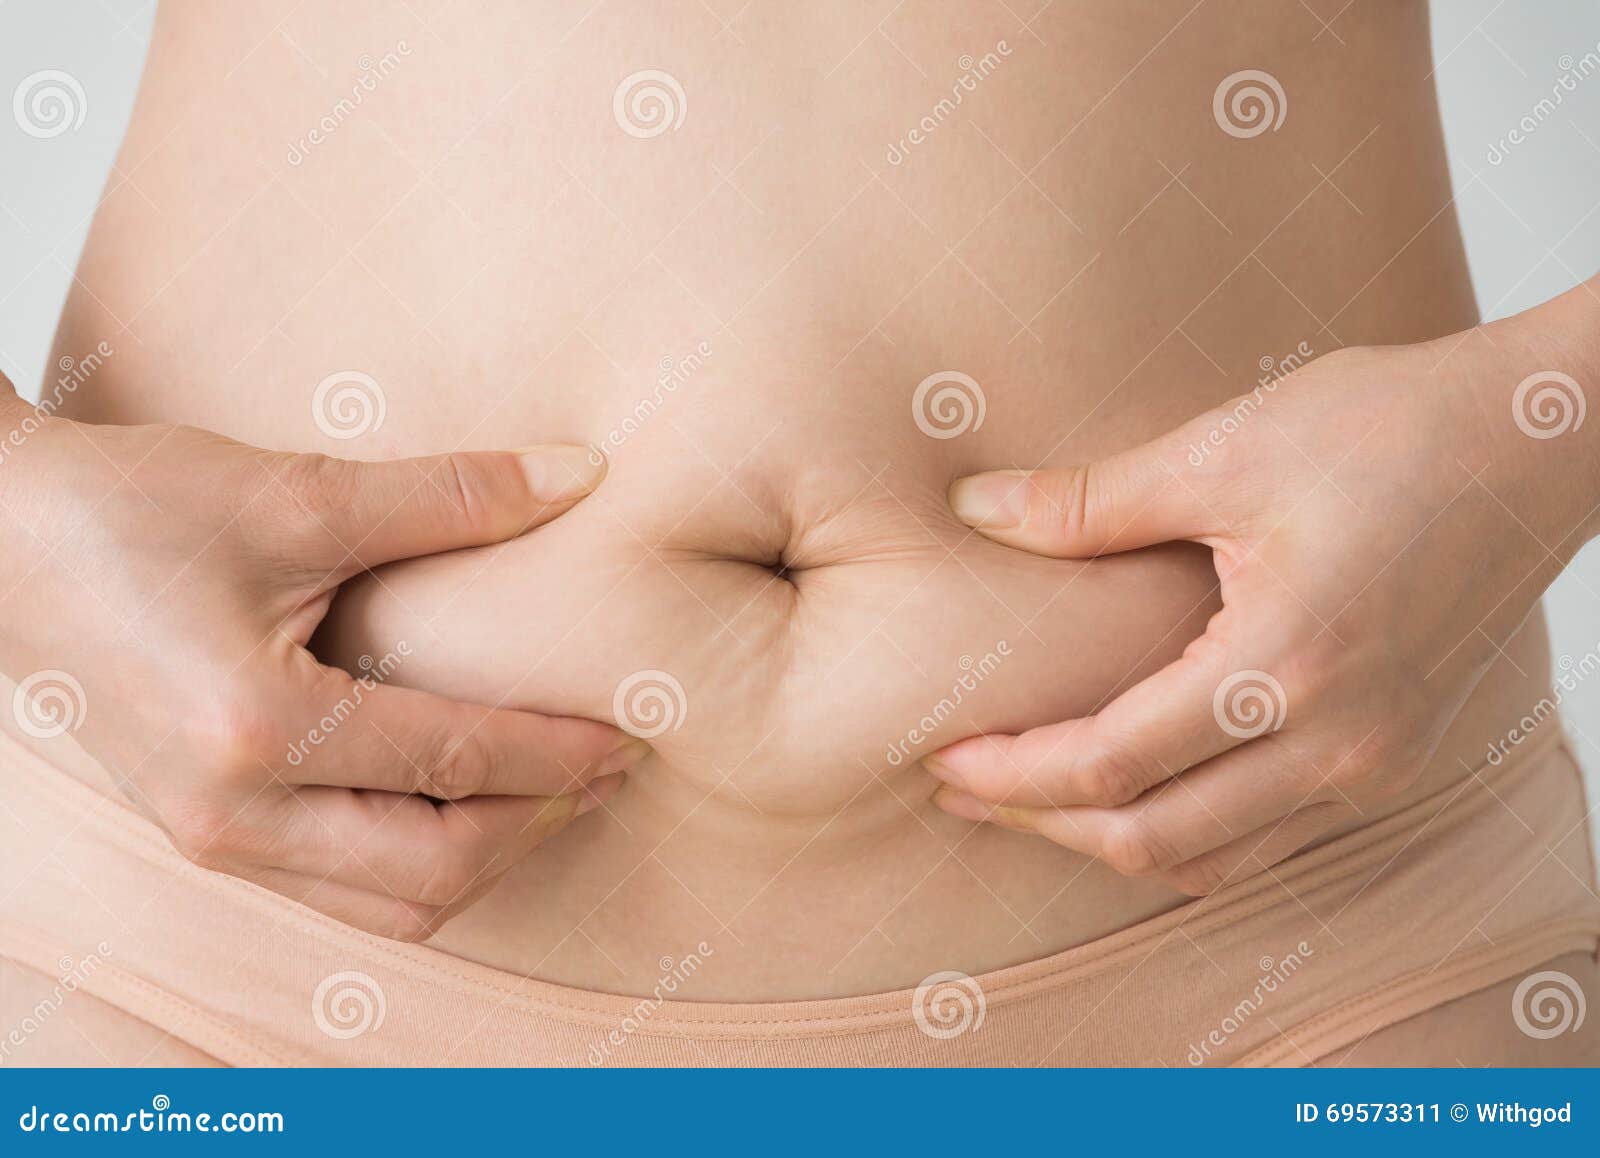 woman squeezes belly fat